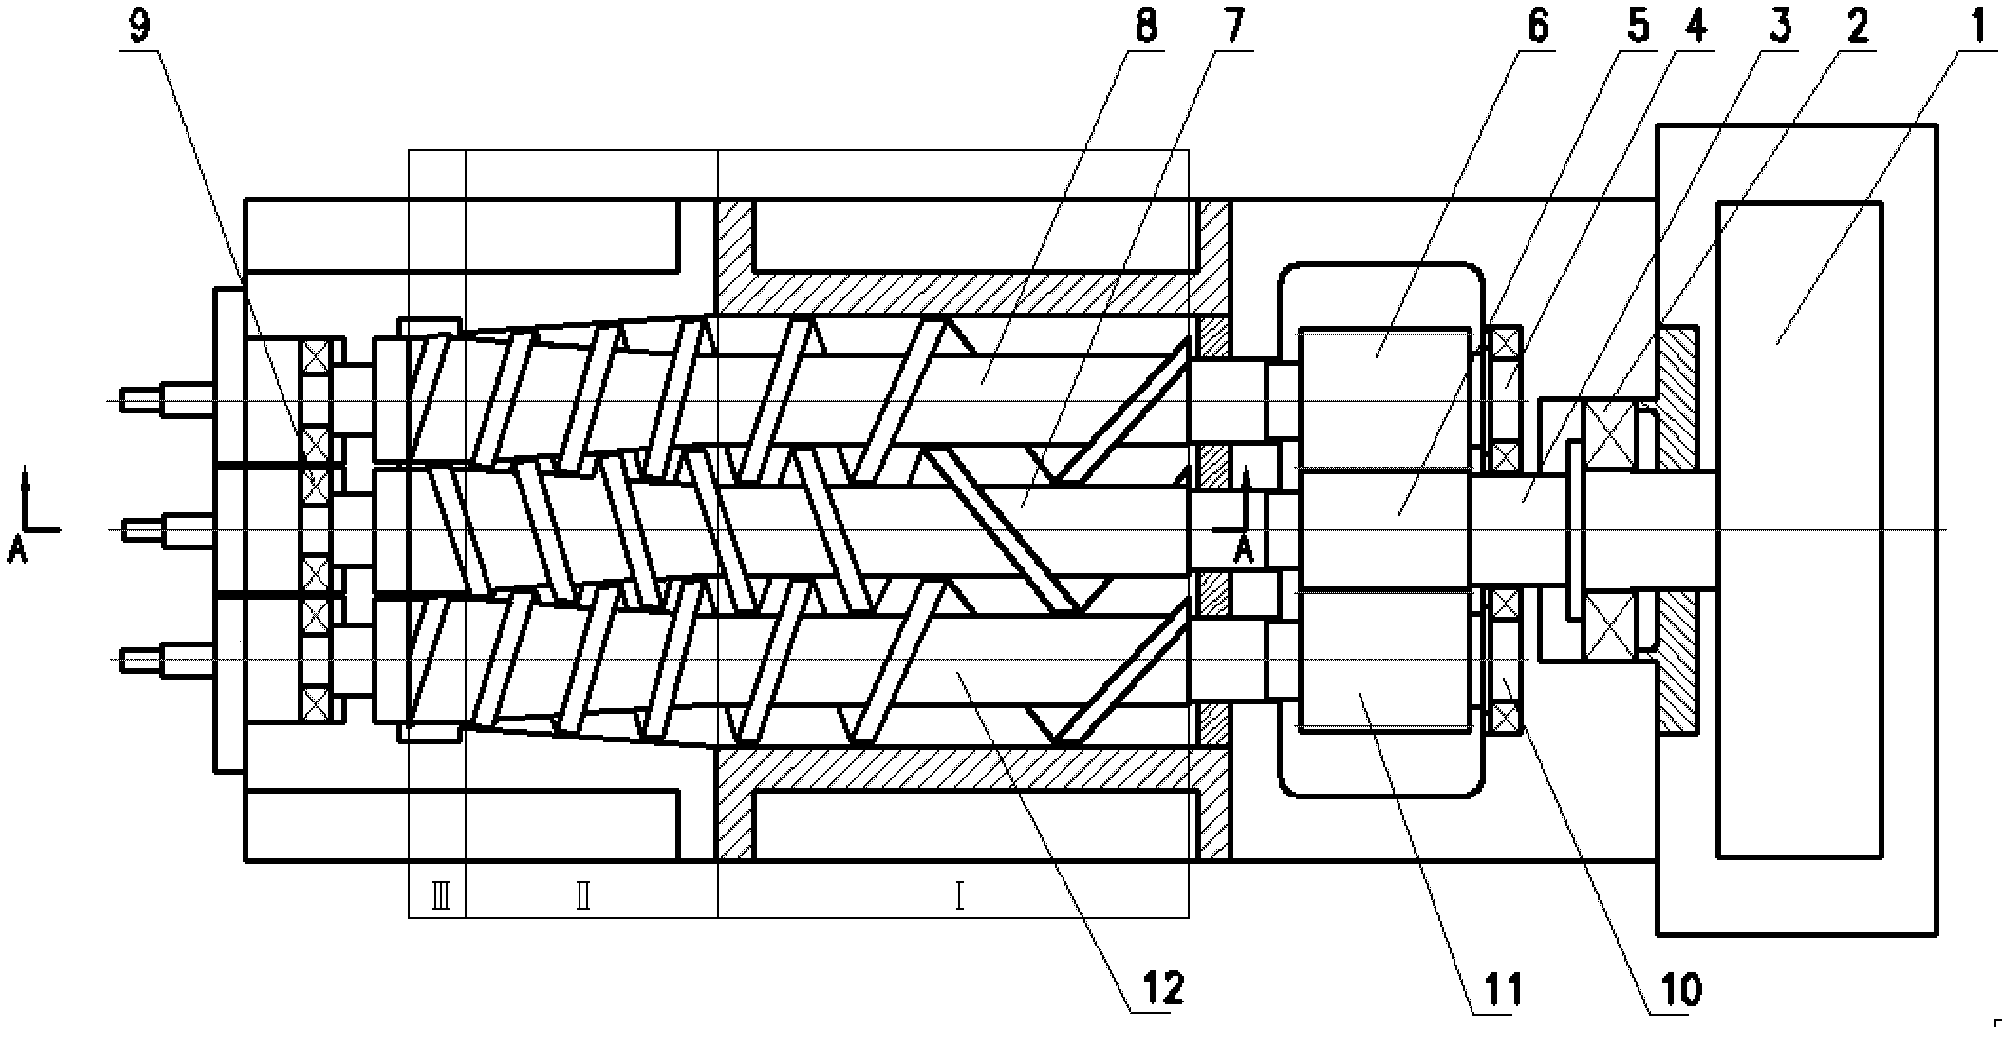 Continuous steam explosion device for plant fibers